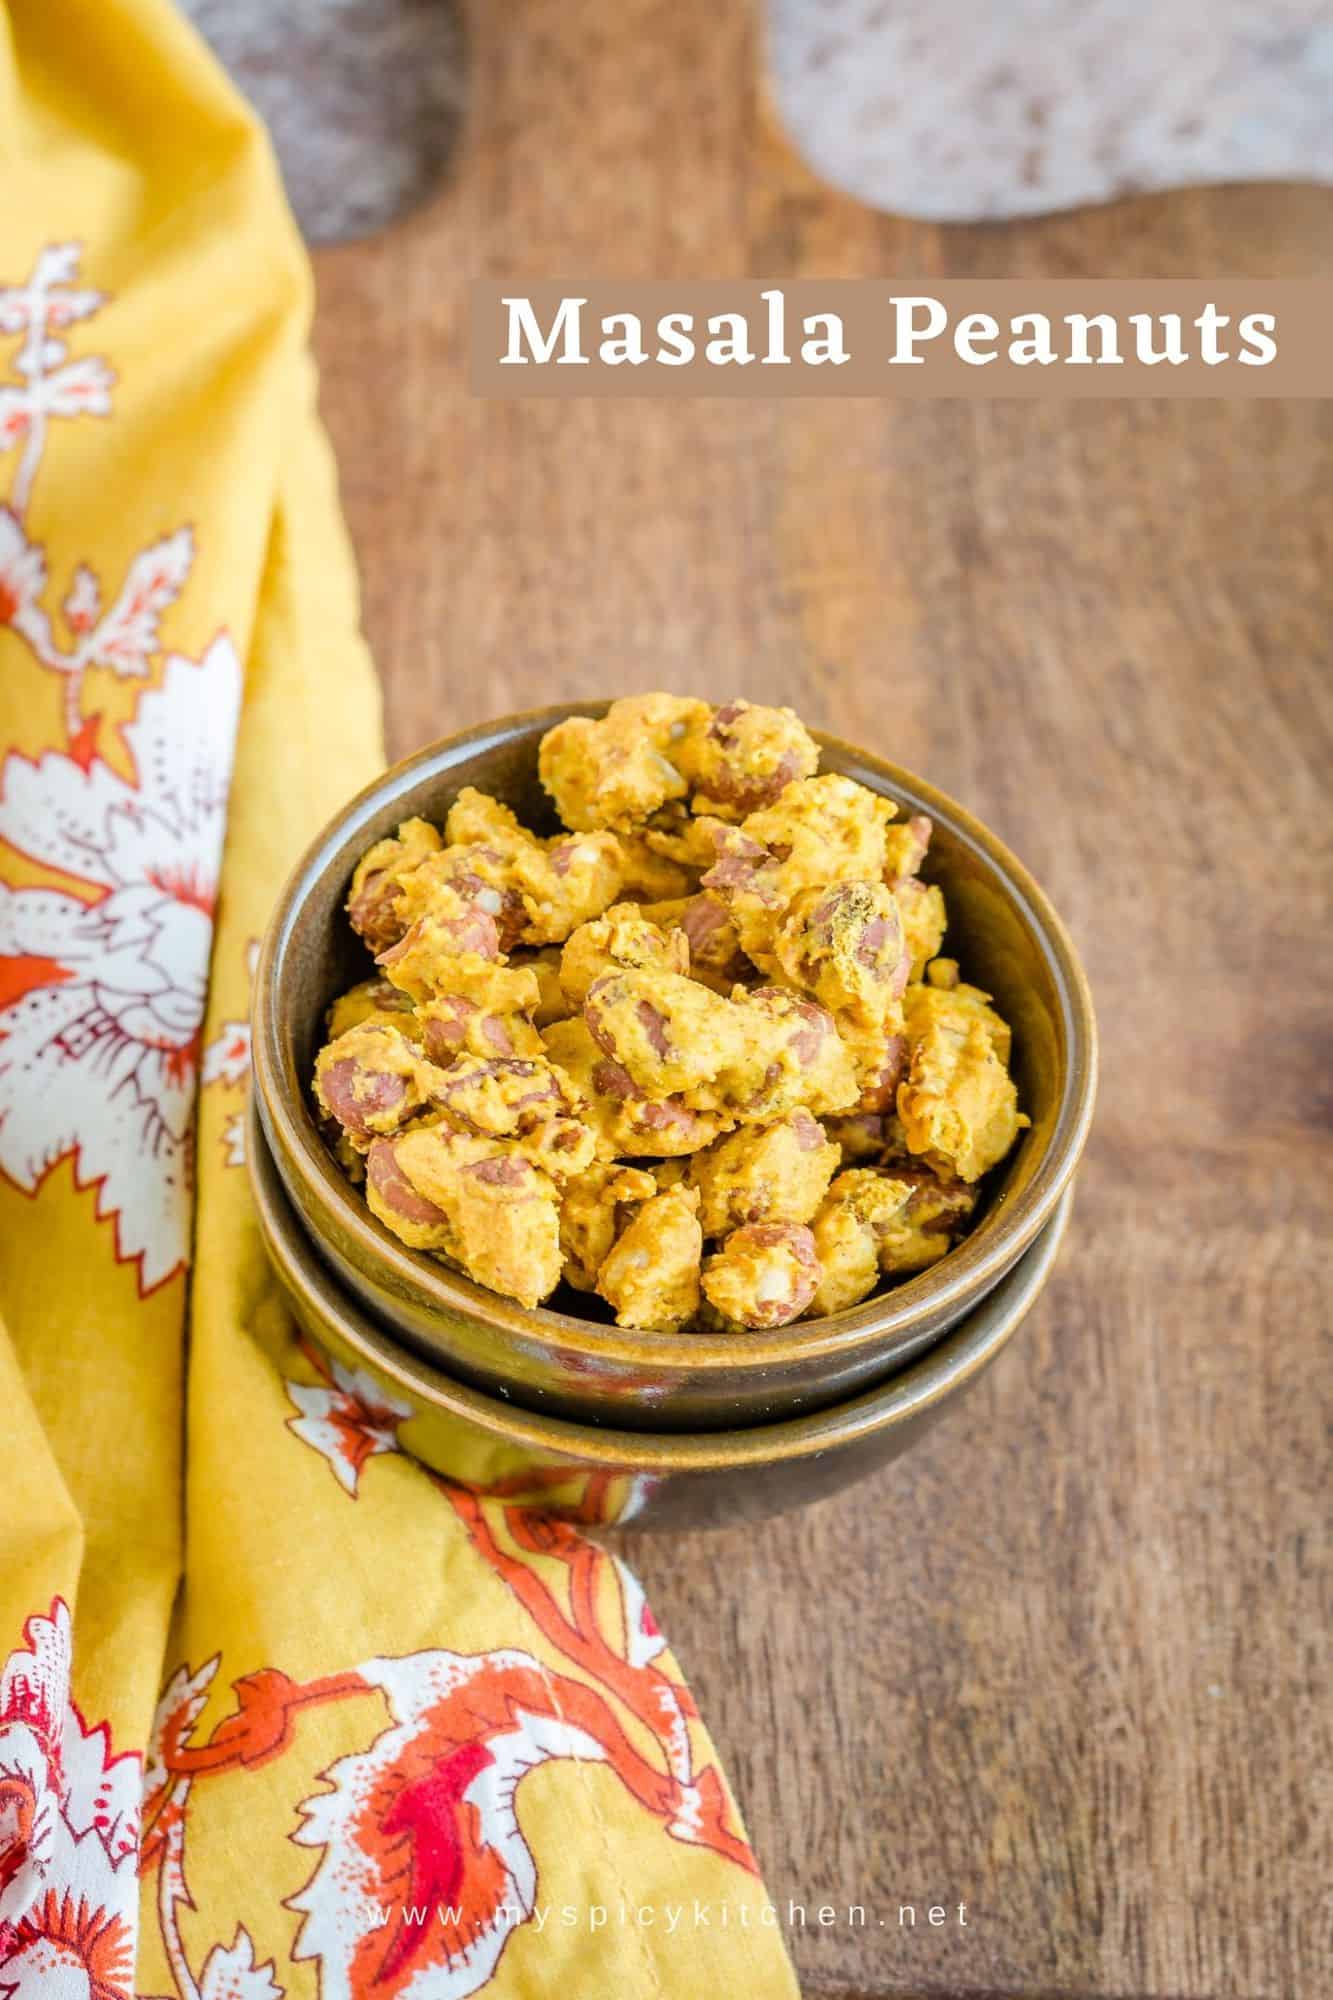 Baked masala peanuts in a bowl, on a wooden board and a napkin on the left side of the bowl.